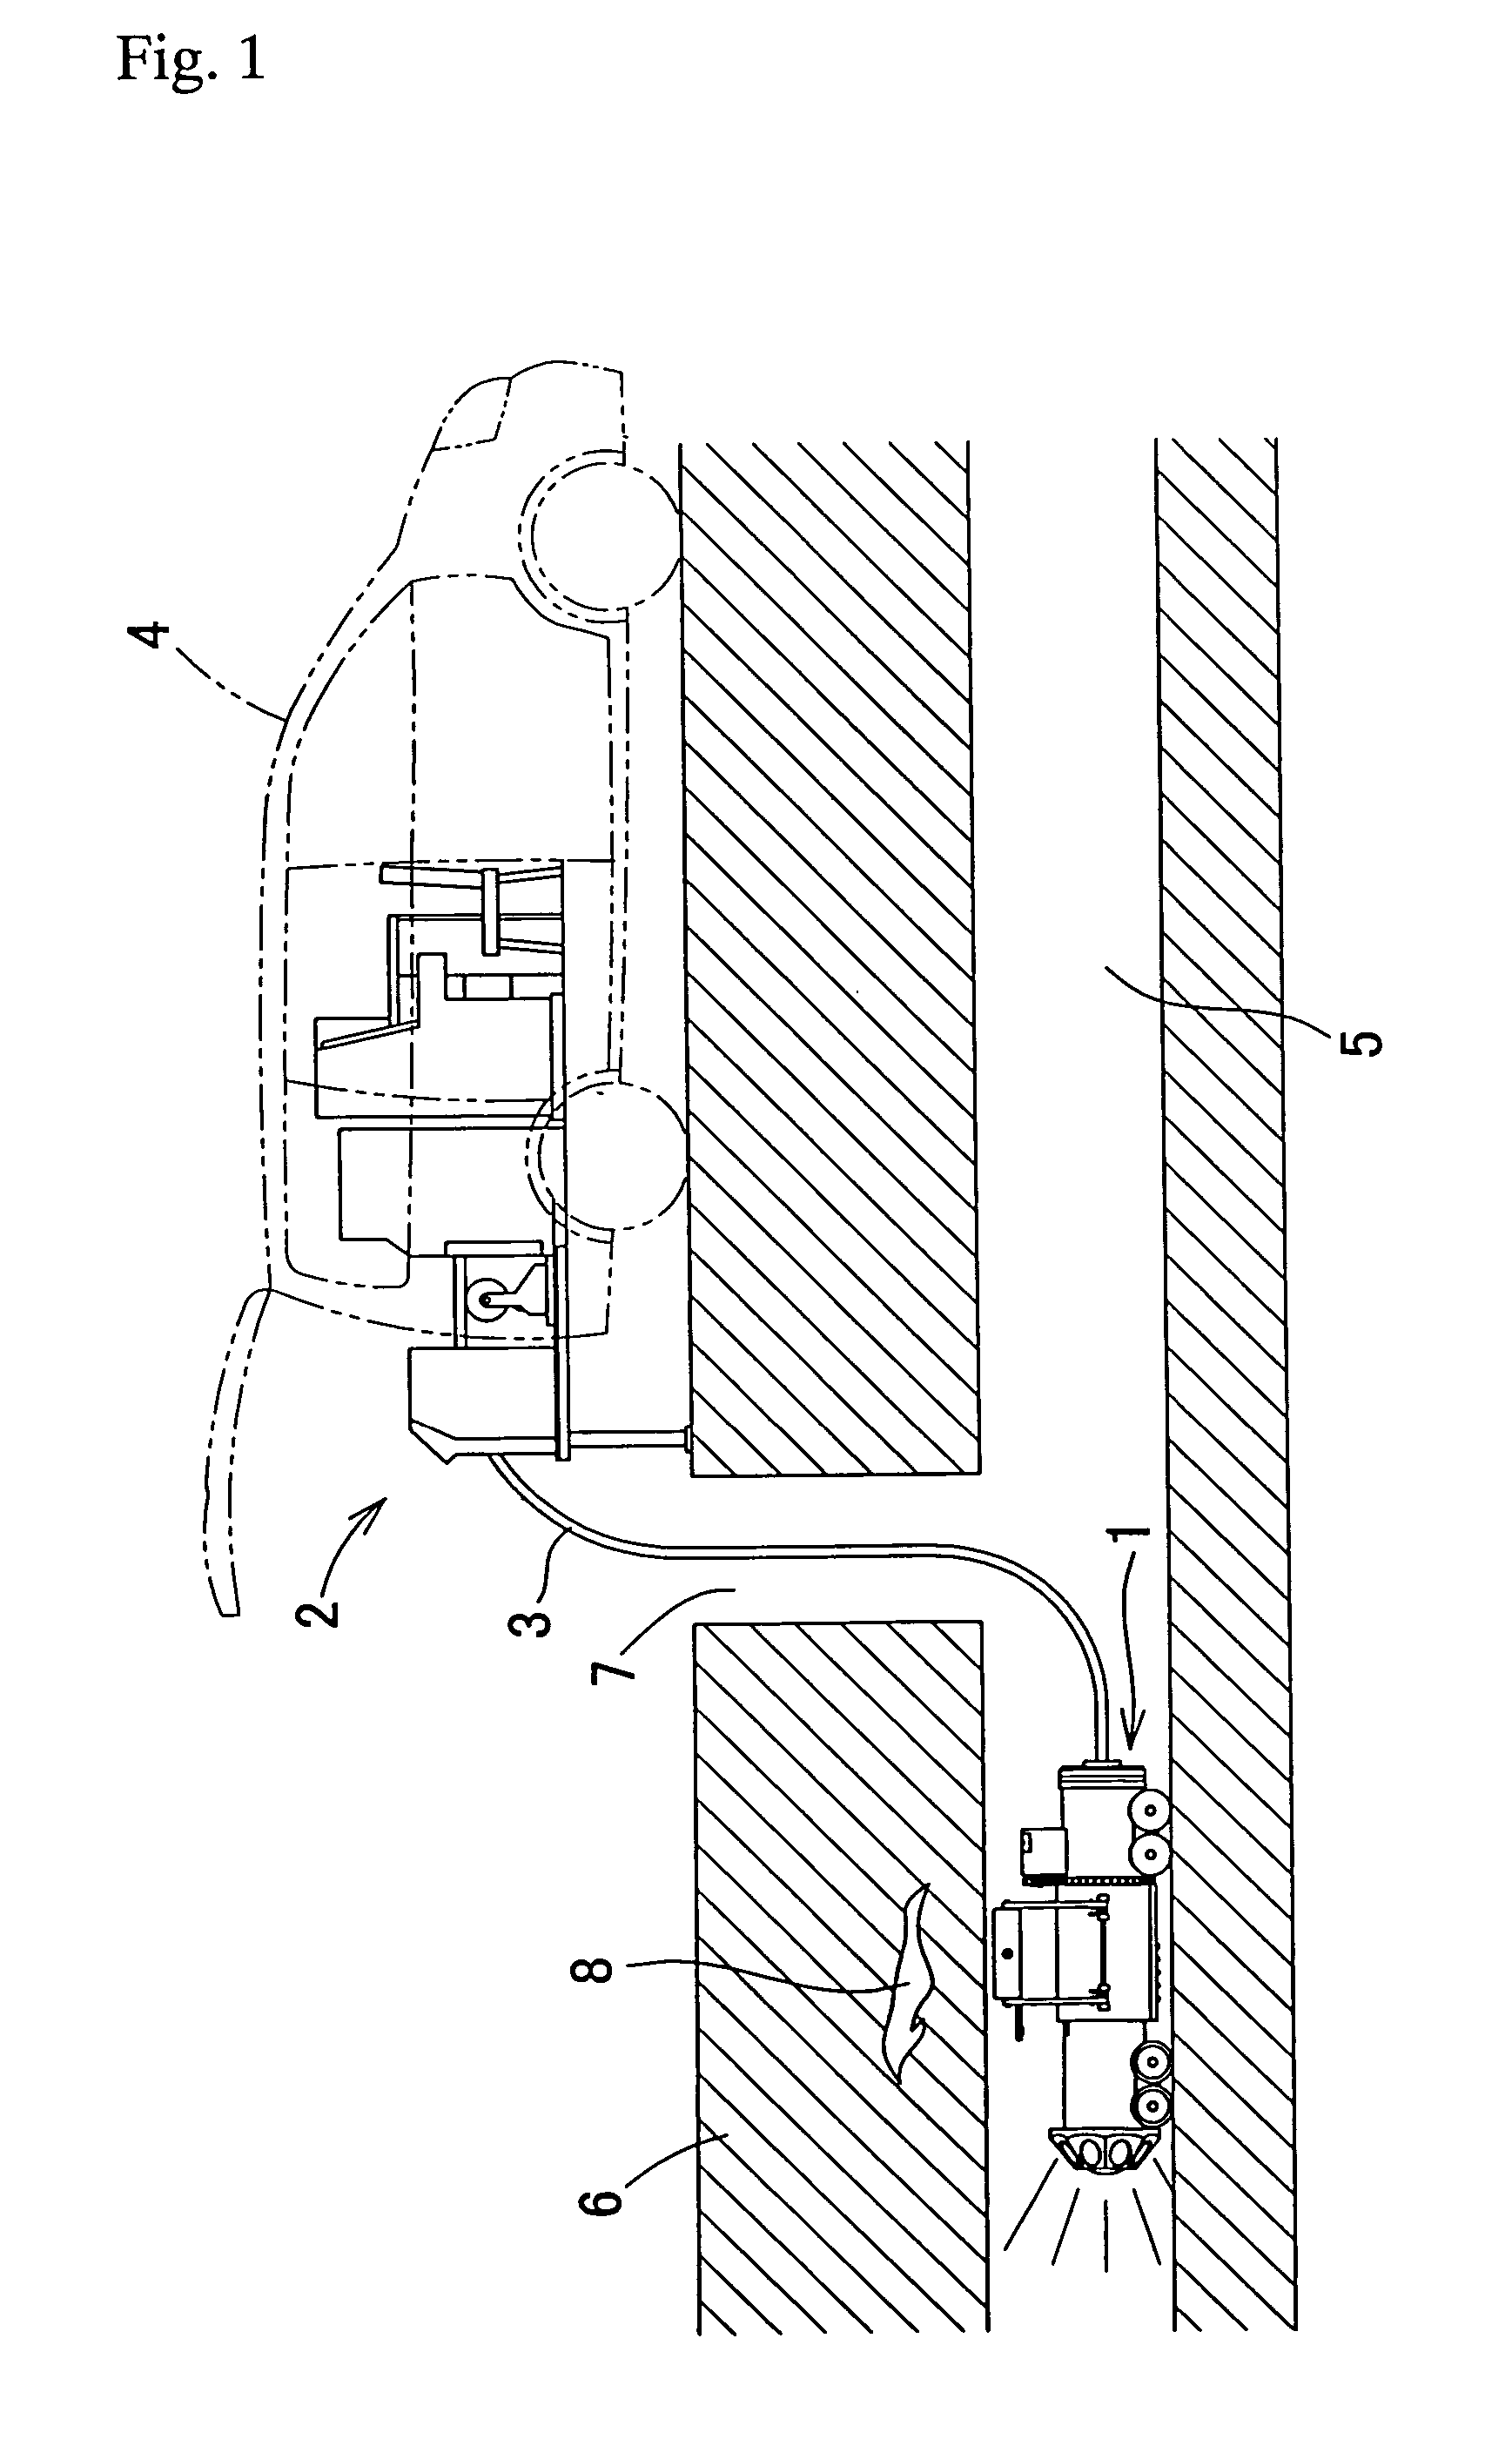 Device and method for inspecting inside of underground pipe line and method of inspecting concrete on inside of underground pipe line for deterioration